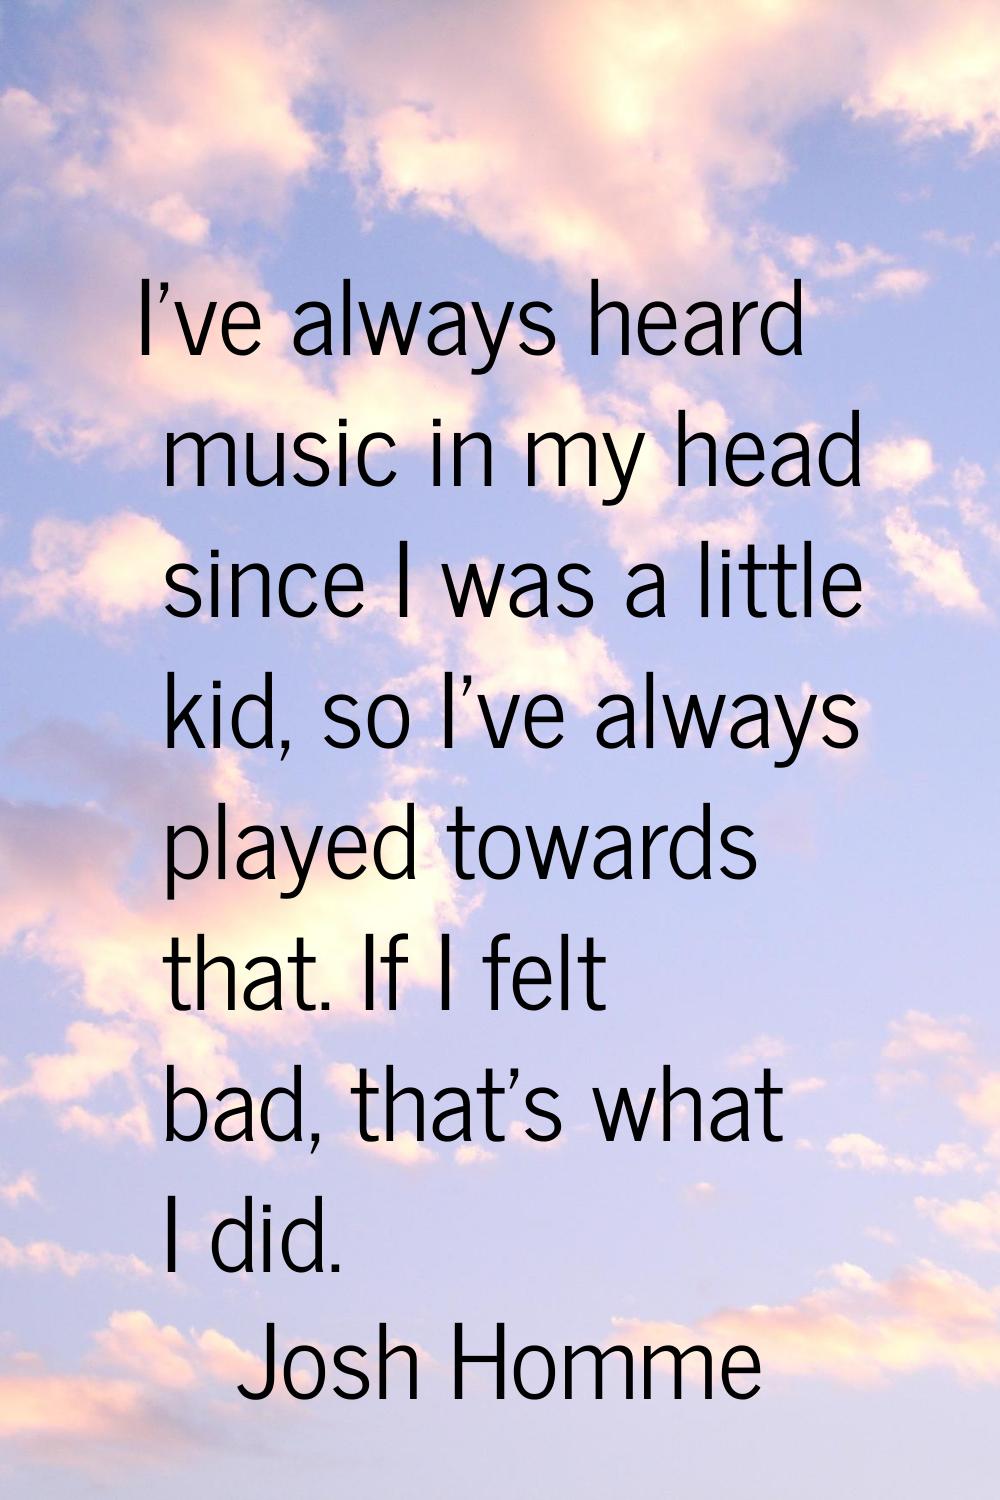 I've always heard music in my head since I was a little kid, so I've always played towards that. If